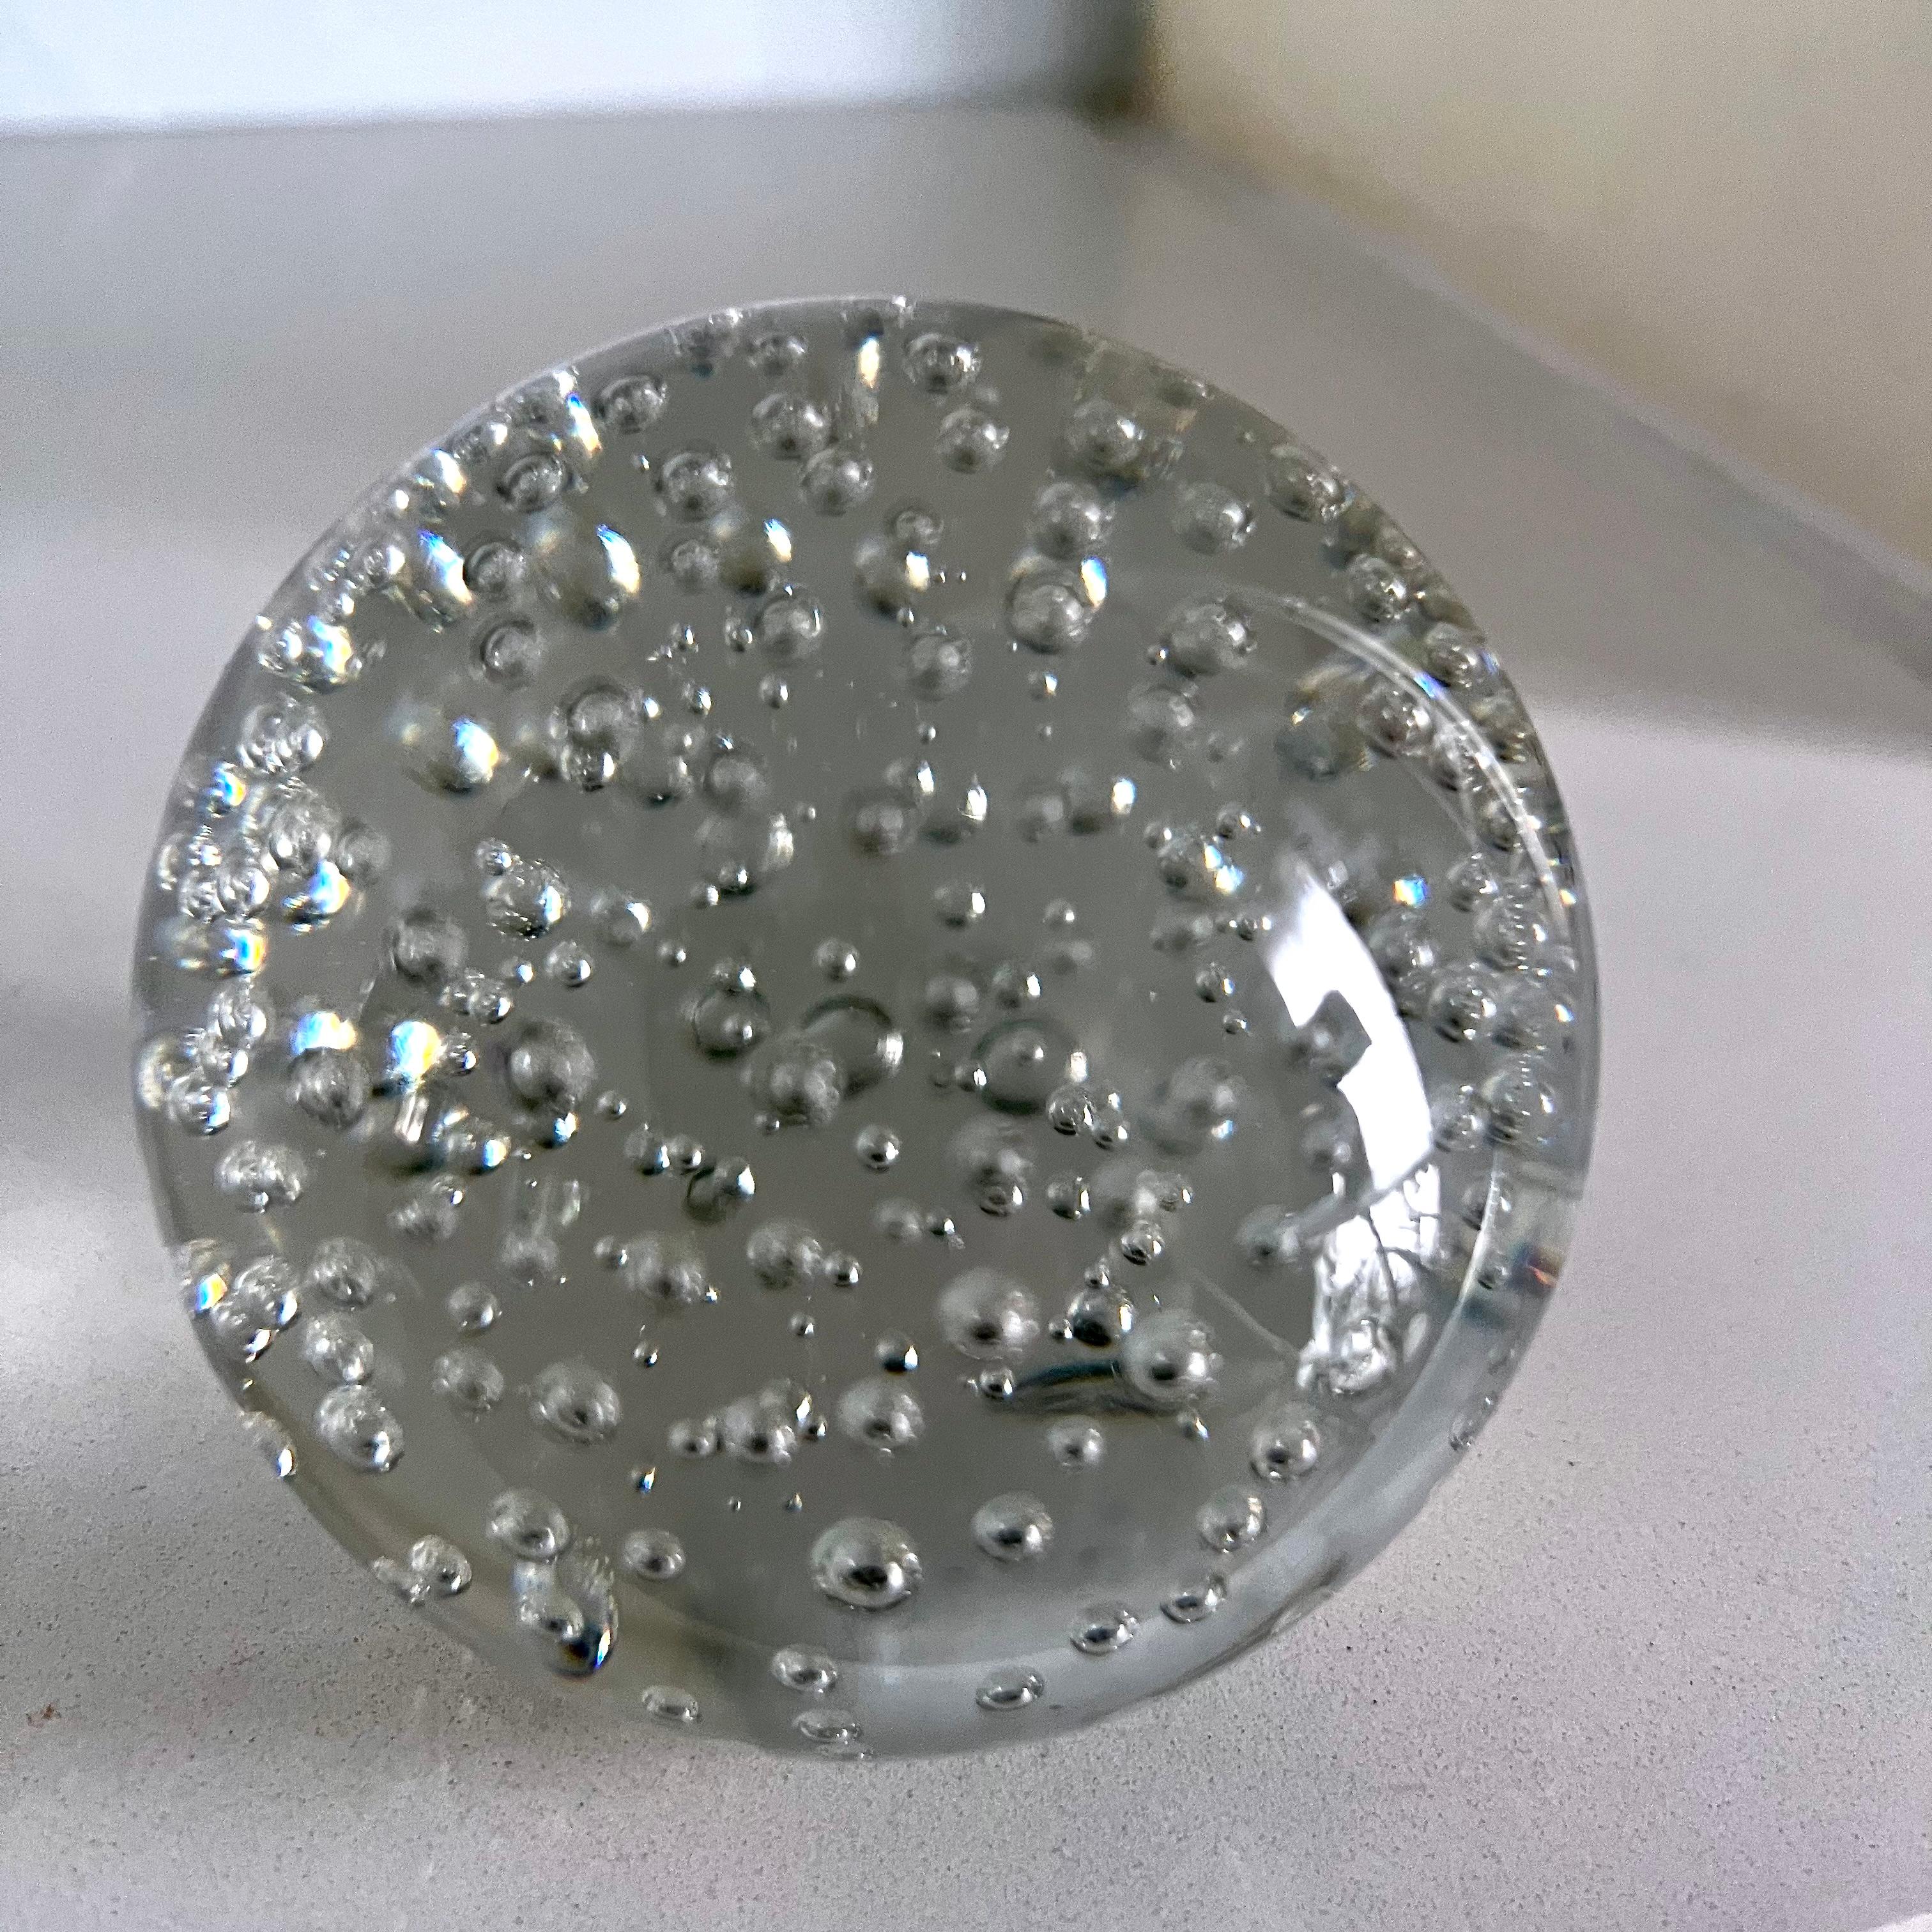 Clear vintage Murano glass bubble paperweight or decorative object. Small bubbles.